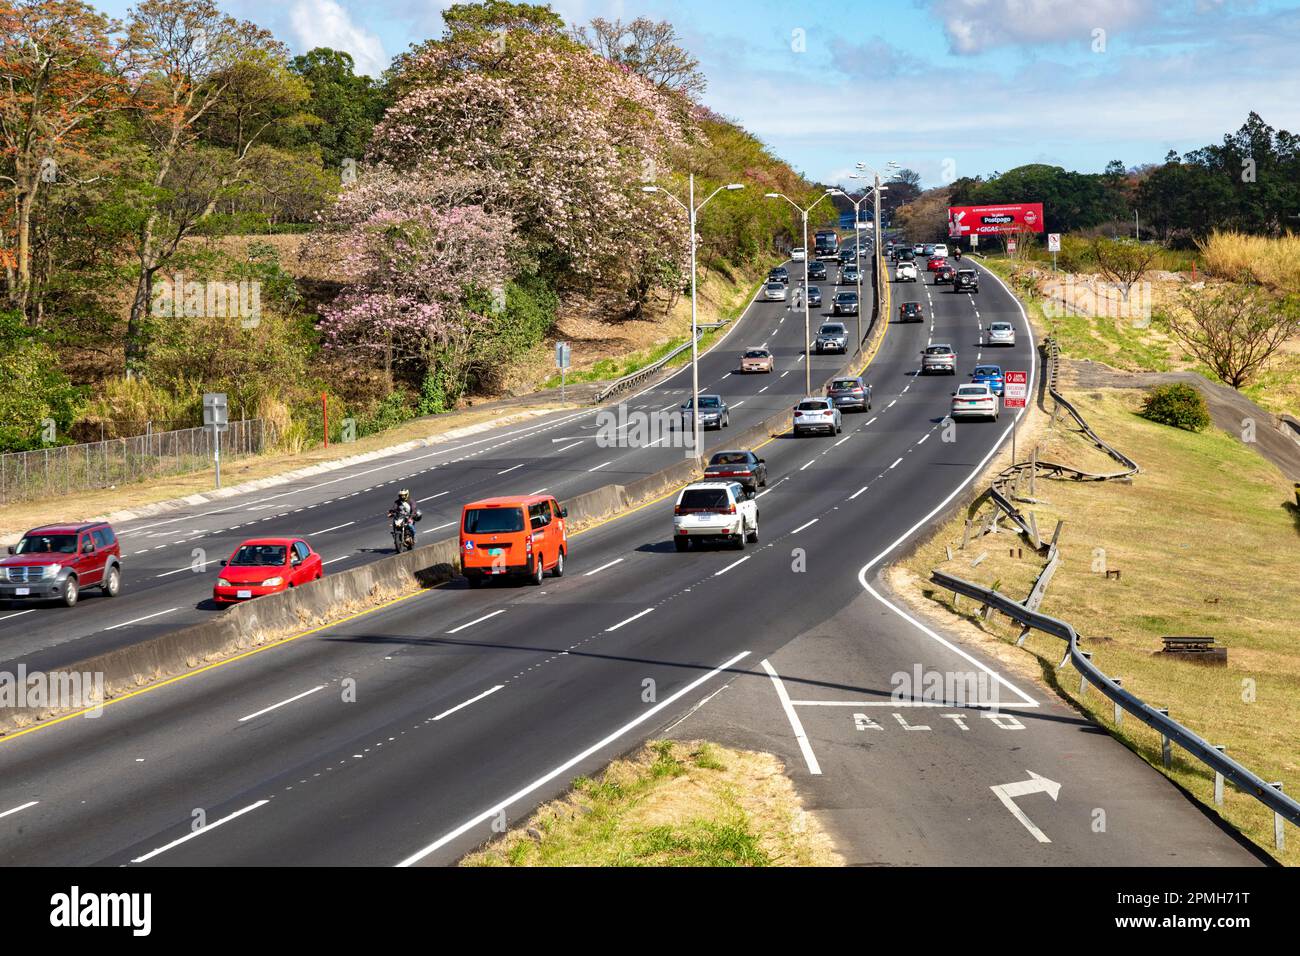 San Jose, Costa Rica - The Pan American Highway in the suburbs of San Jose. The highway stretches 19,000 miles from Prudhoe Bay, Alaska to the tip of Stock Photo